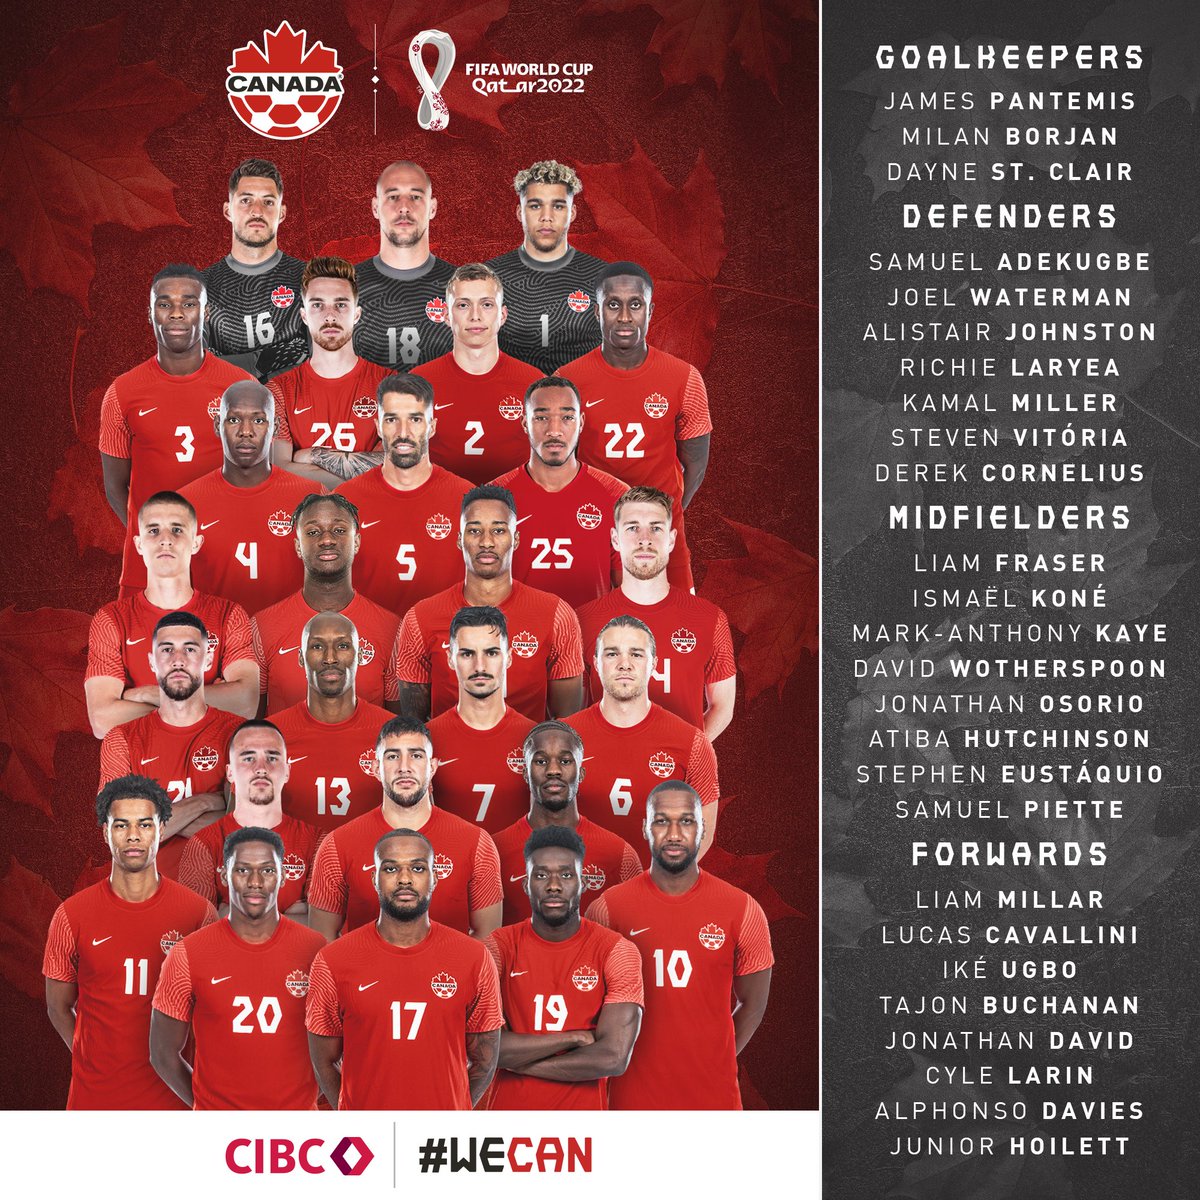 Did you know that 19 of 26 players named to the @CanadaSoccerEN squad for FIFA World Cup Qatar have ties/roots to Ontario? That's what we like to call #MadeInOntario proud! Best of luck gents, our province, and the whole nation, will be cheering you on!